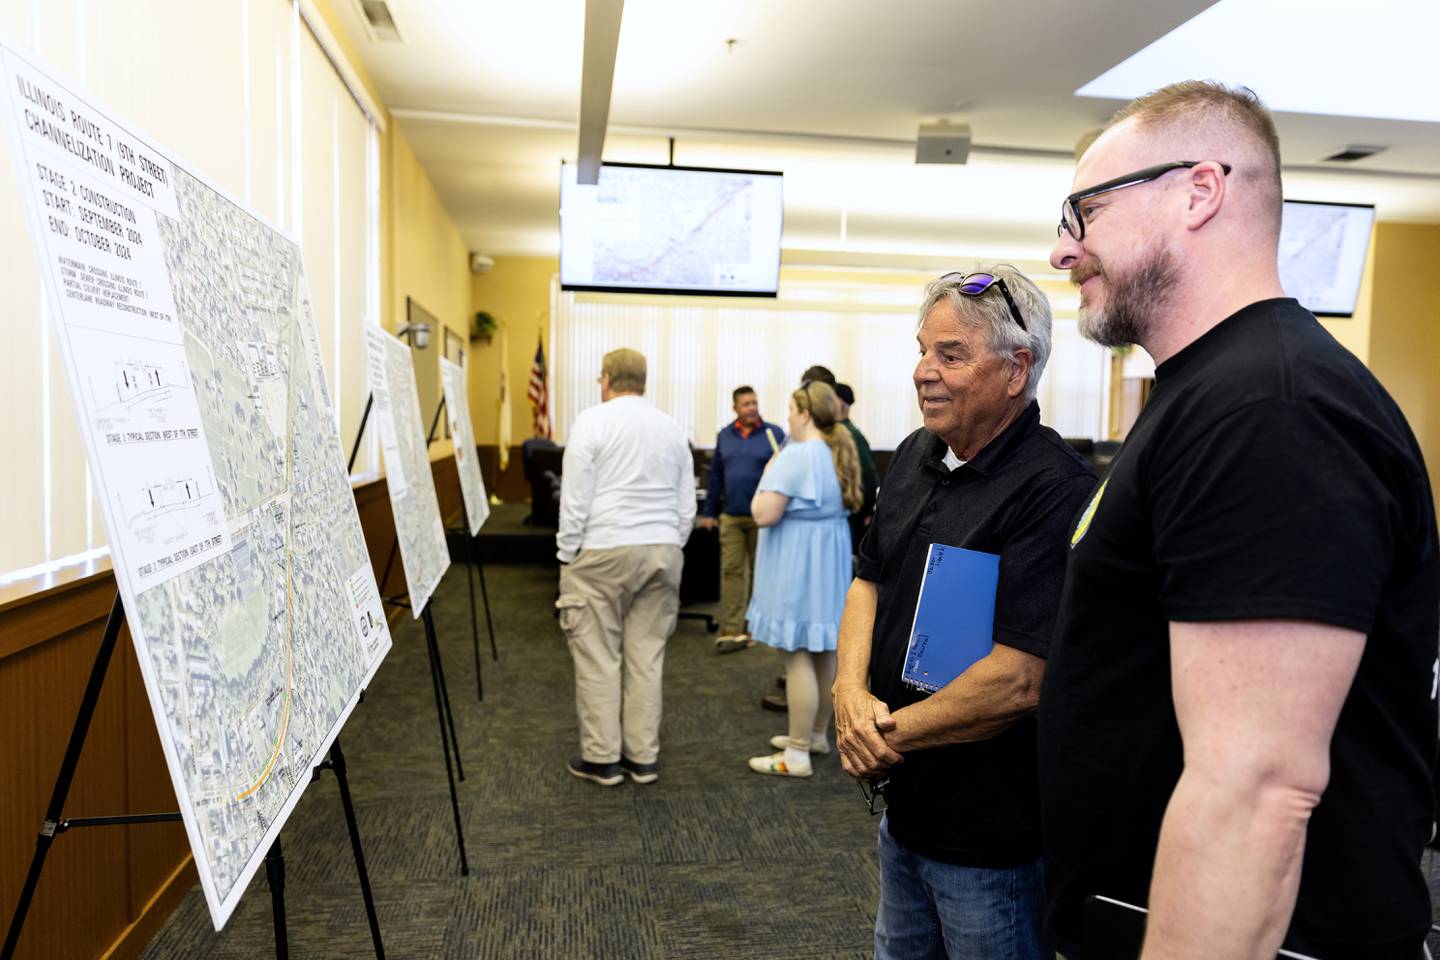 (L:R) Michael Harvey and Michael Matuszak, with Lockport-based business Portable John, look at the Illinois Route 7 Channelization Project plans during the pre-construction open house at Lockport City Hall on April 15, 2024.